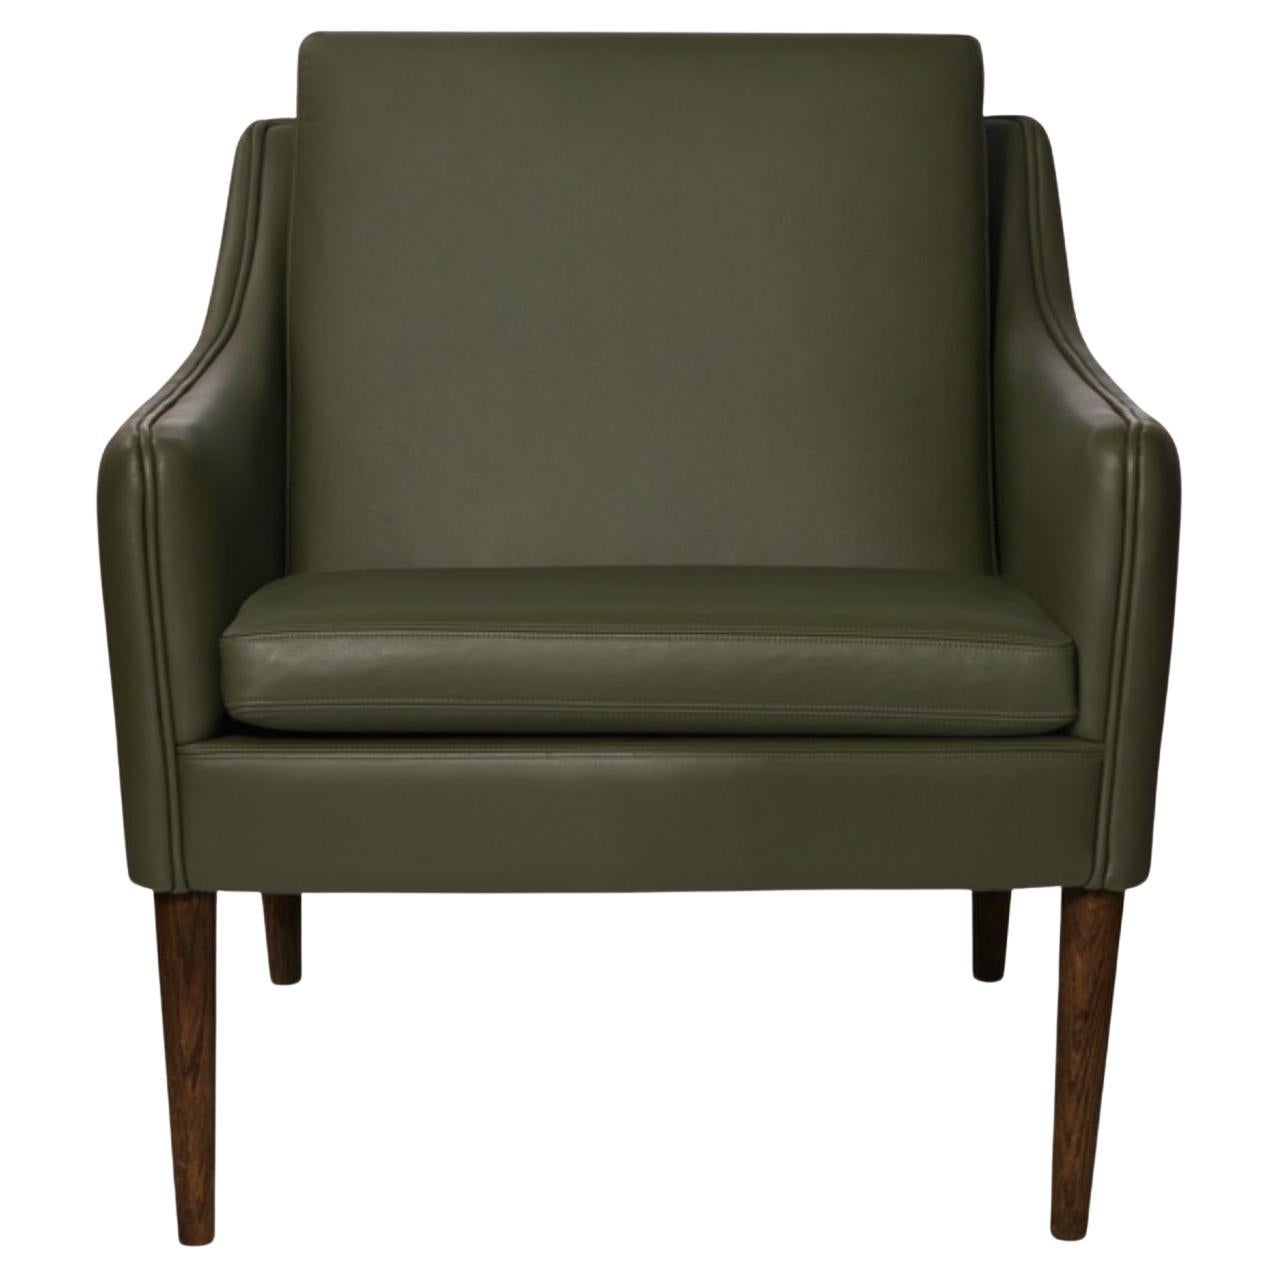 Mr. Olsen Lounge Chair Solid Walnut Pickle Green Leather by Warm Nordic